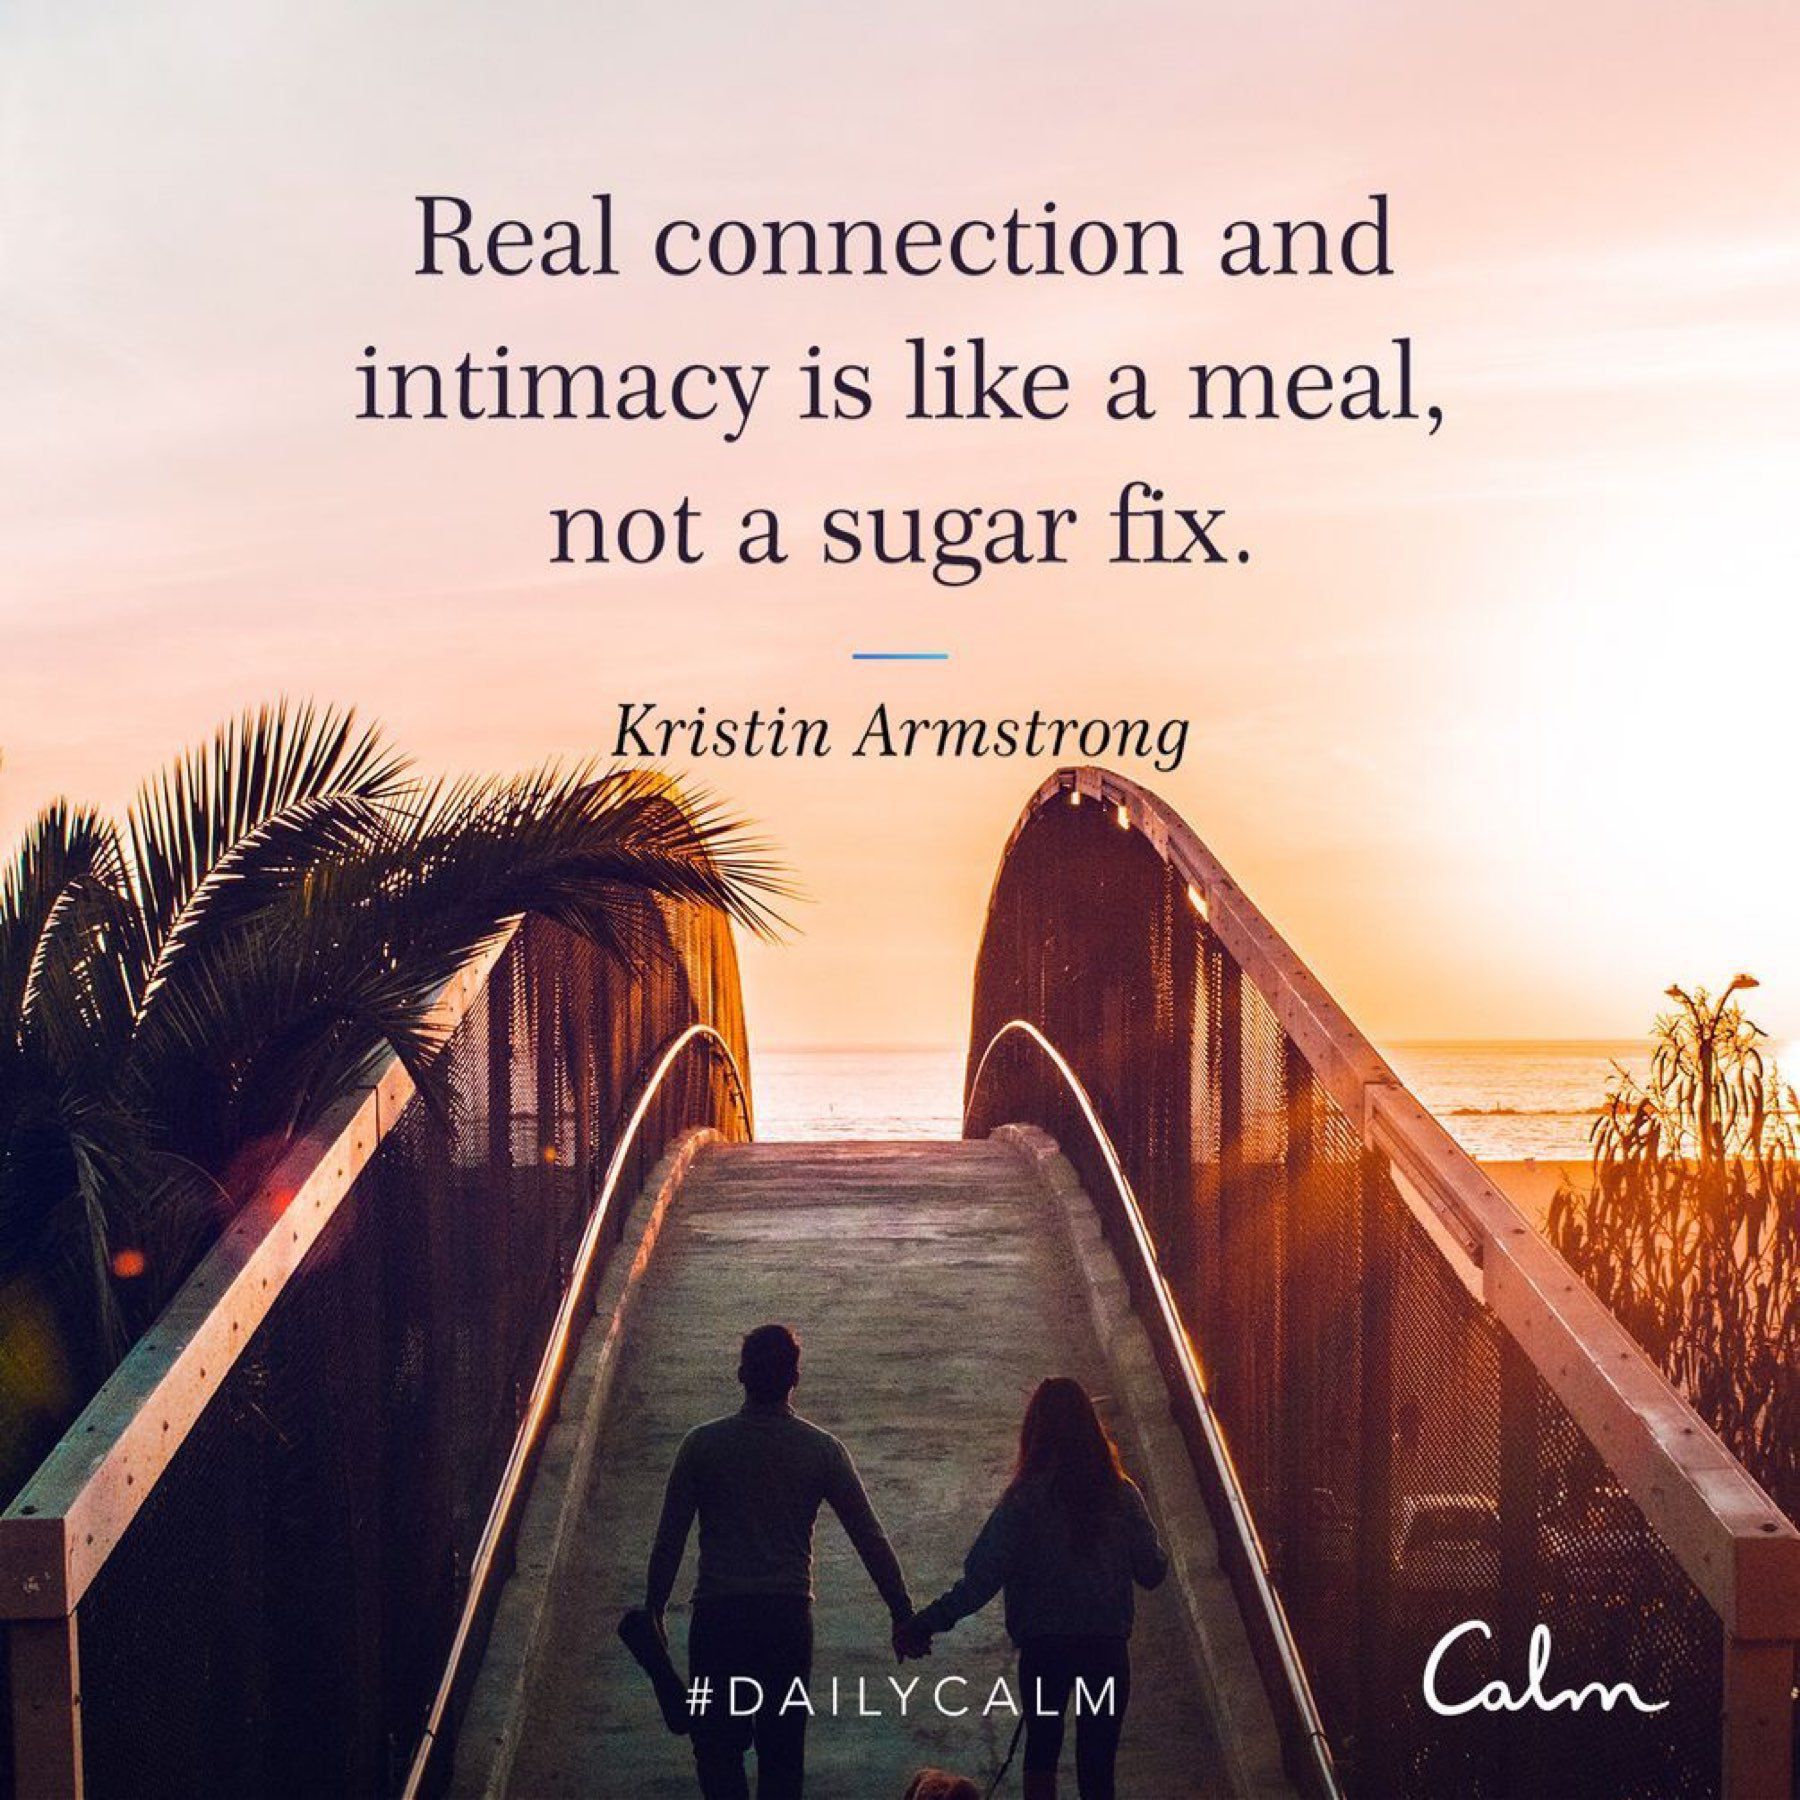 Real connection is like a meal